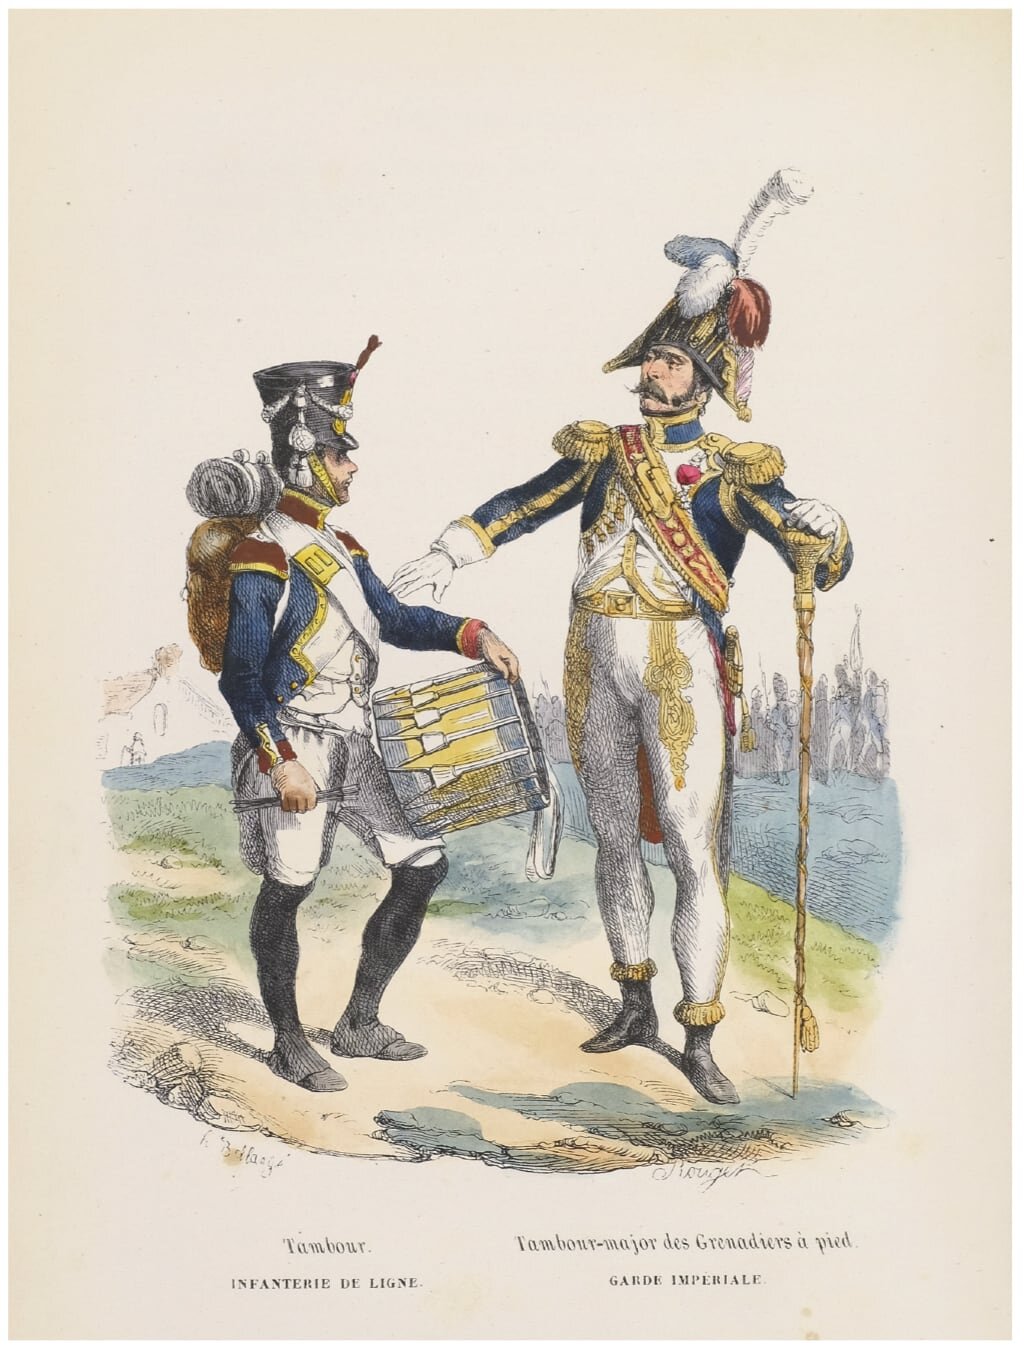  The second edition from 1843 [no. 390] with 44 coloured plates as well as a watercolour by Bellangé, and the watercolour model for the book’s frontispiece 